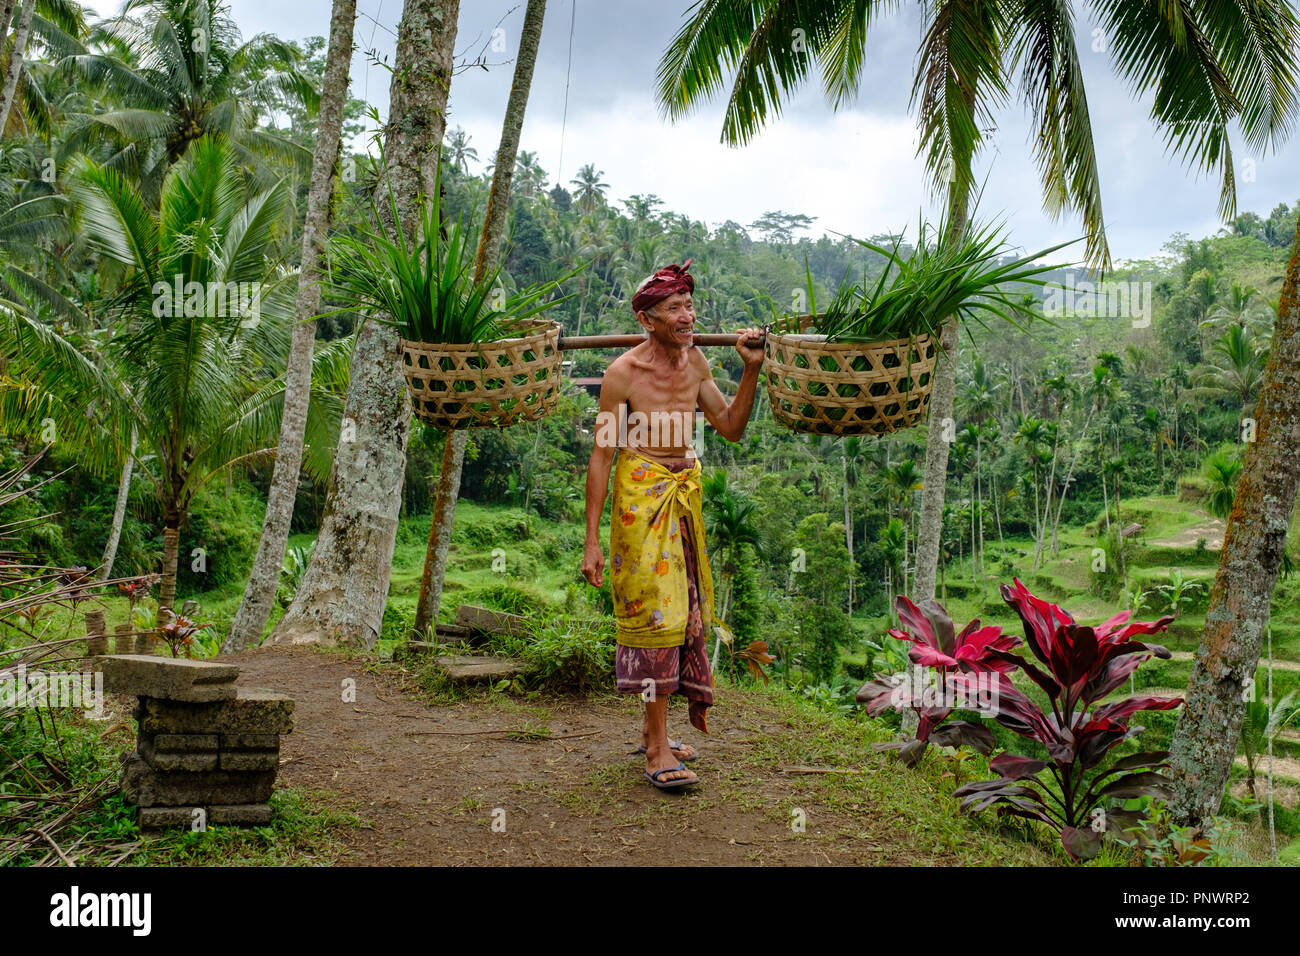 A local worker at the Tegallalang Rice Terrace in Bali, Indonesia Stock Photo